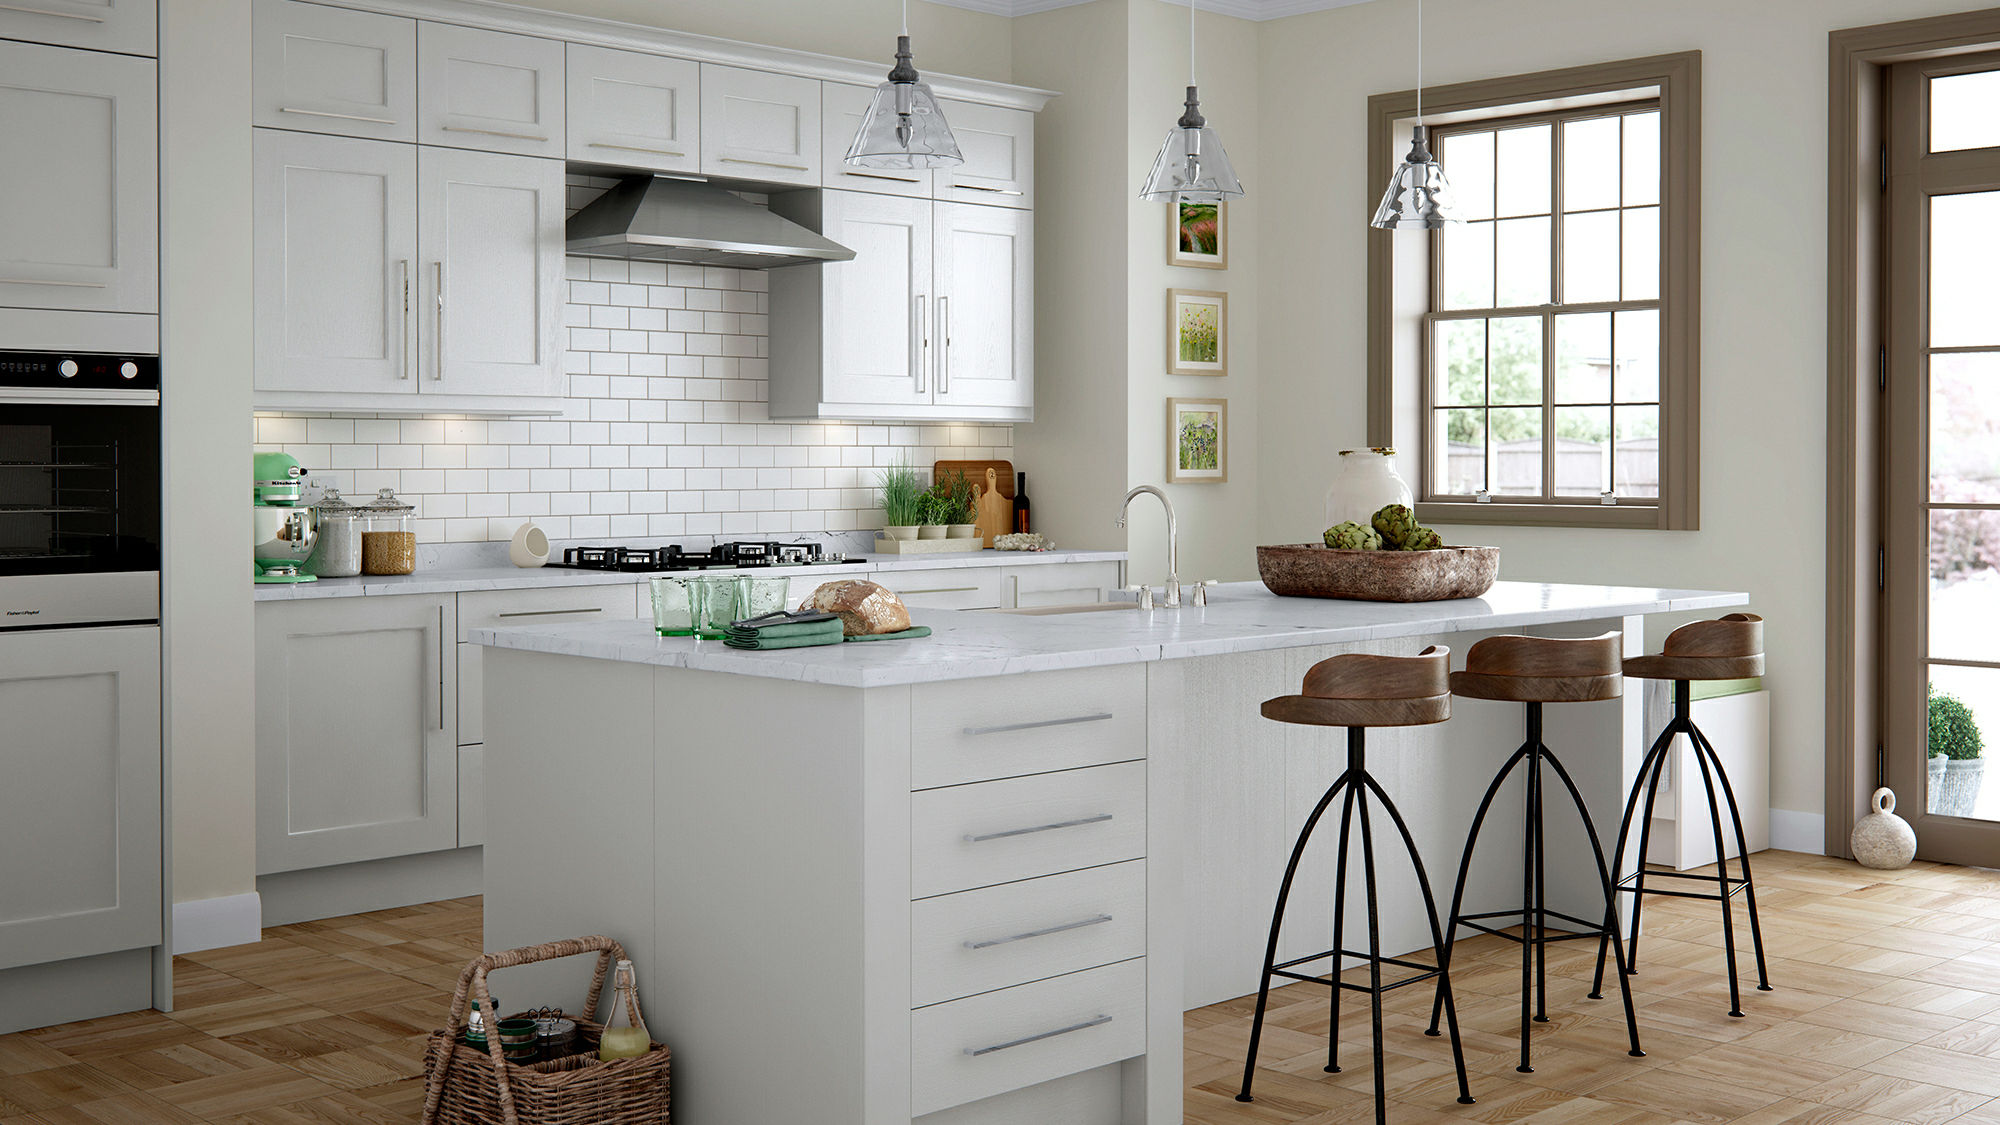 Wakefield solid wood light grey kitchens highlighting artisanal quality in a contemporary grey finish